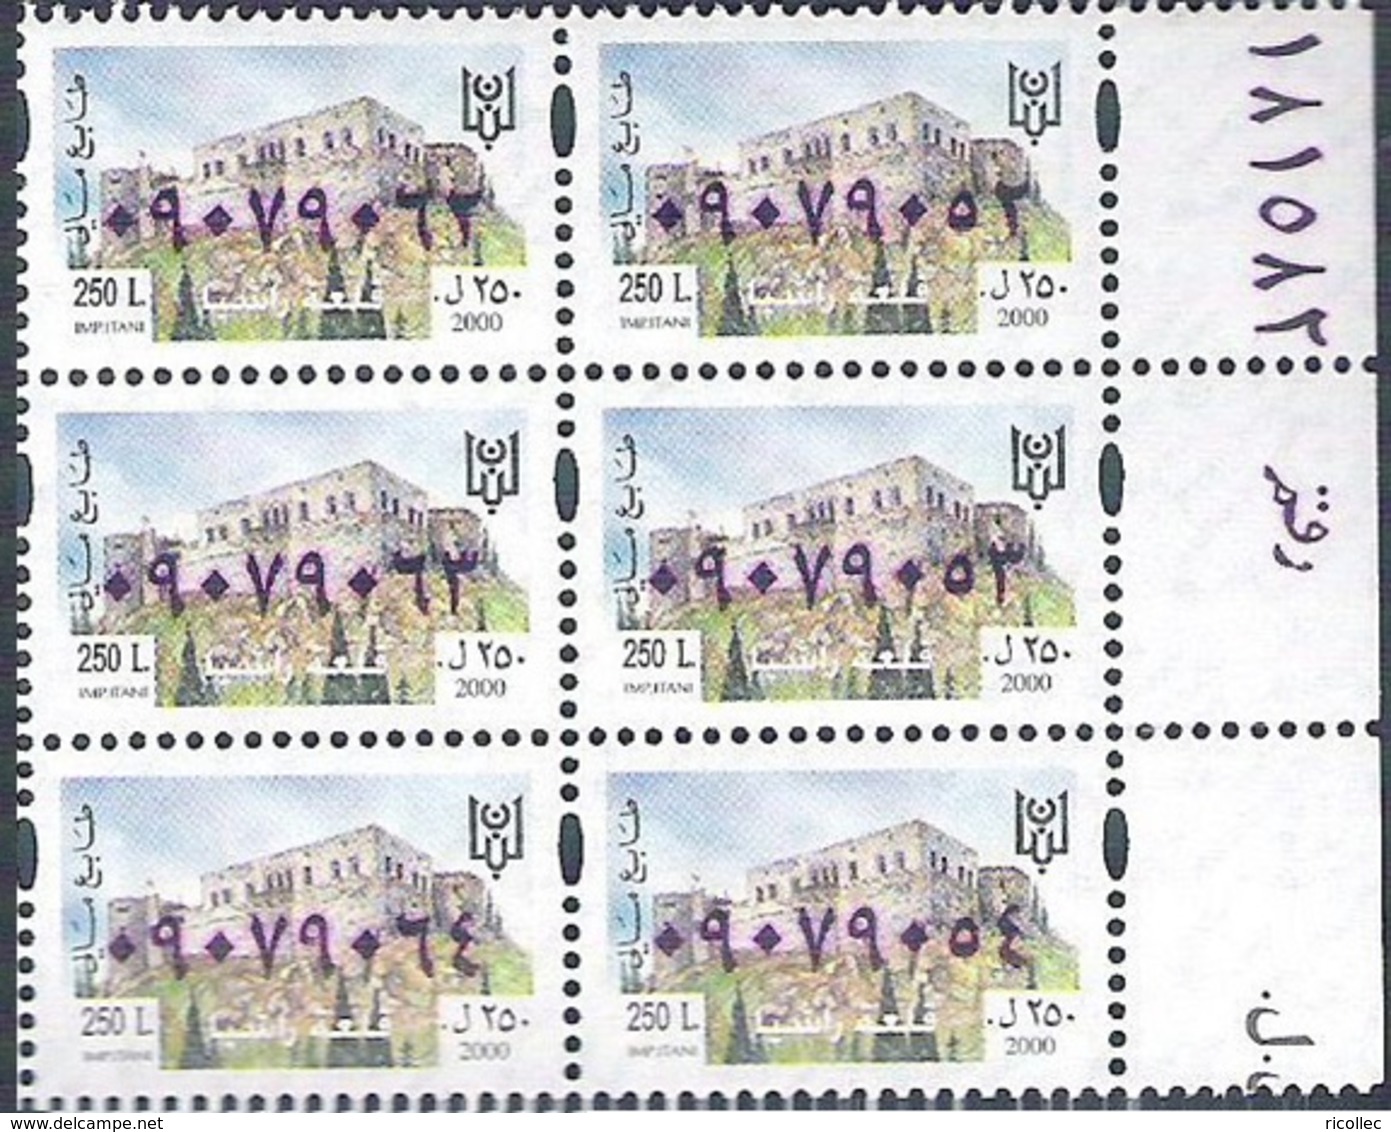 MNH Block Of 6 Fiscal Revenue Stamps With Sheet Number Rachaya 250 Livres 2000 LEBANON LIBAN - Líbano